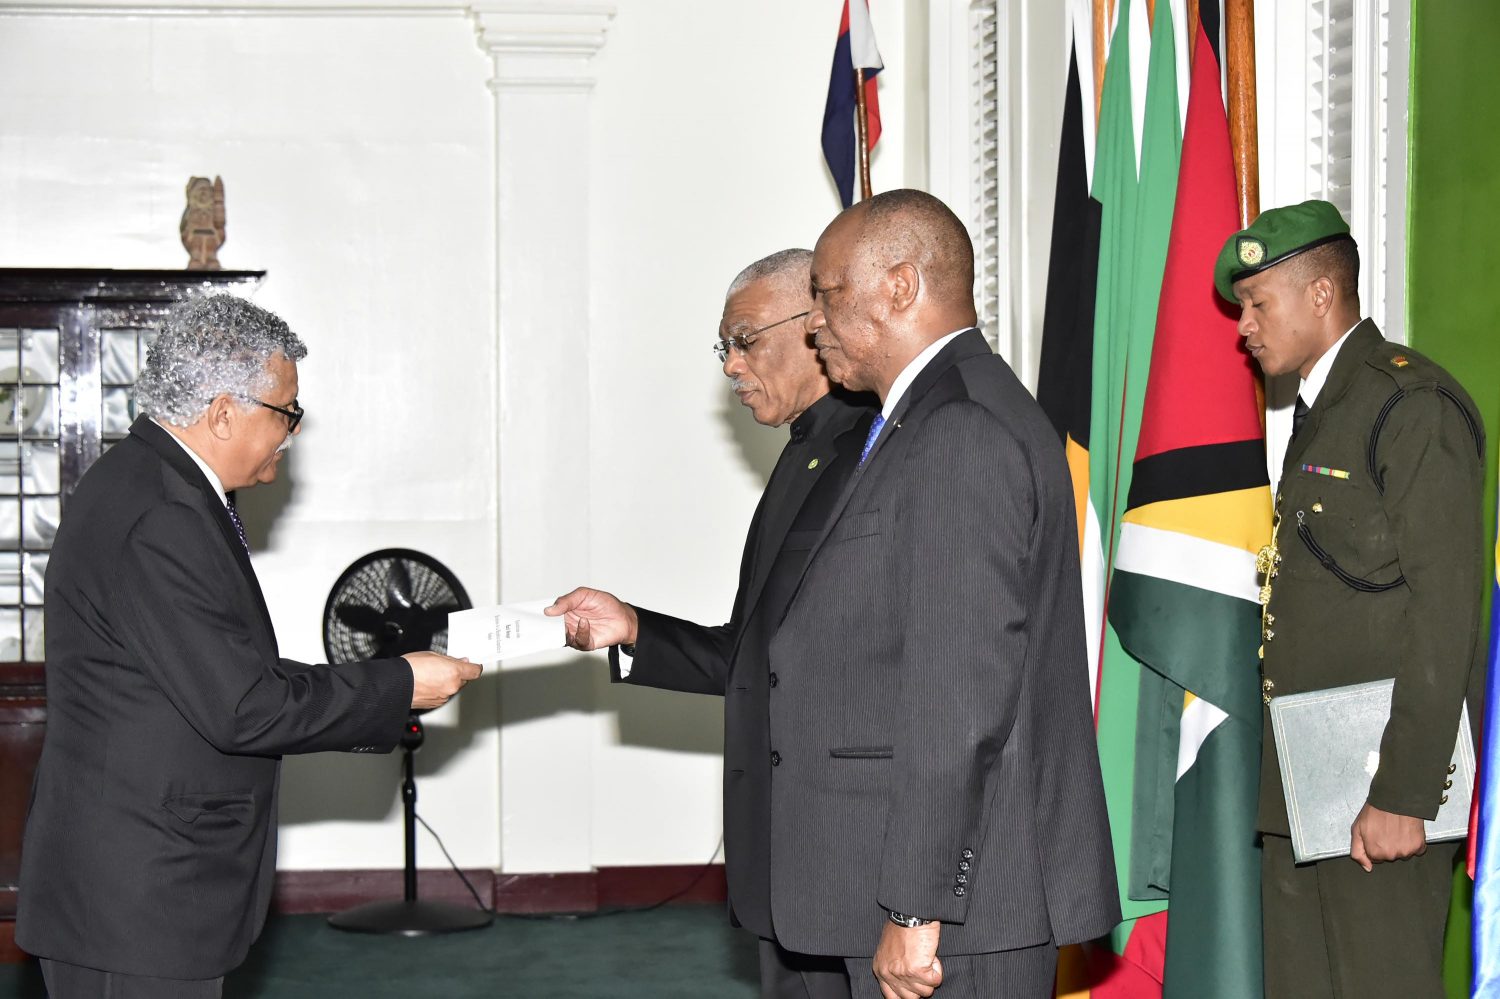 This Ministry of the Presidency photo shows Dr. Alfonso Munera Cavadia (left) presenting his letters of credence to President David Granger. At right is Minister of State Joseph Harmon.